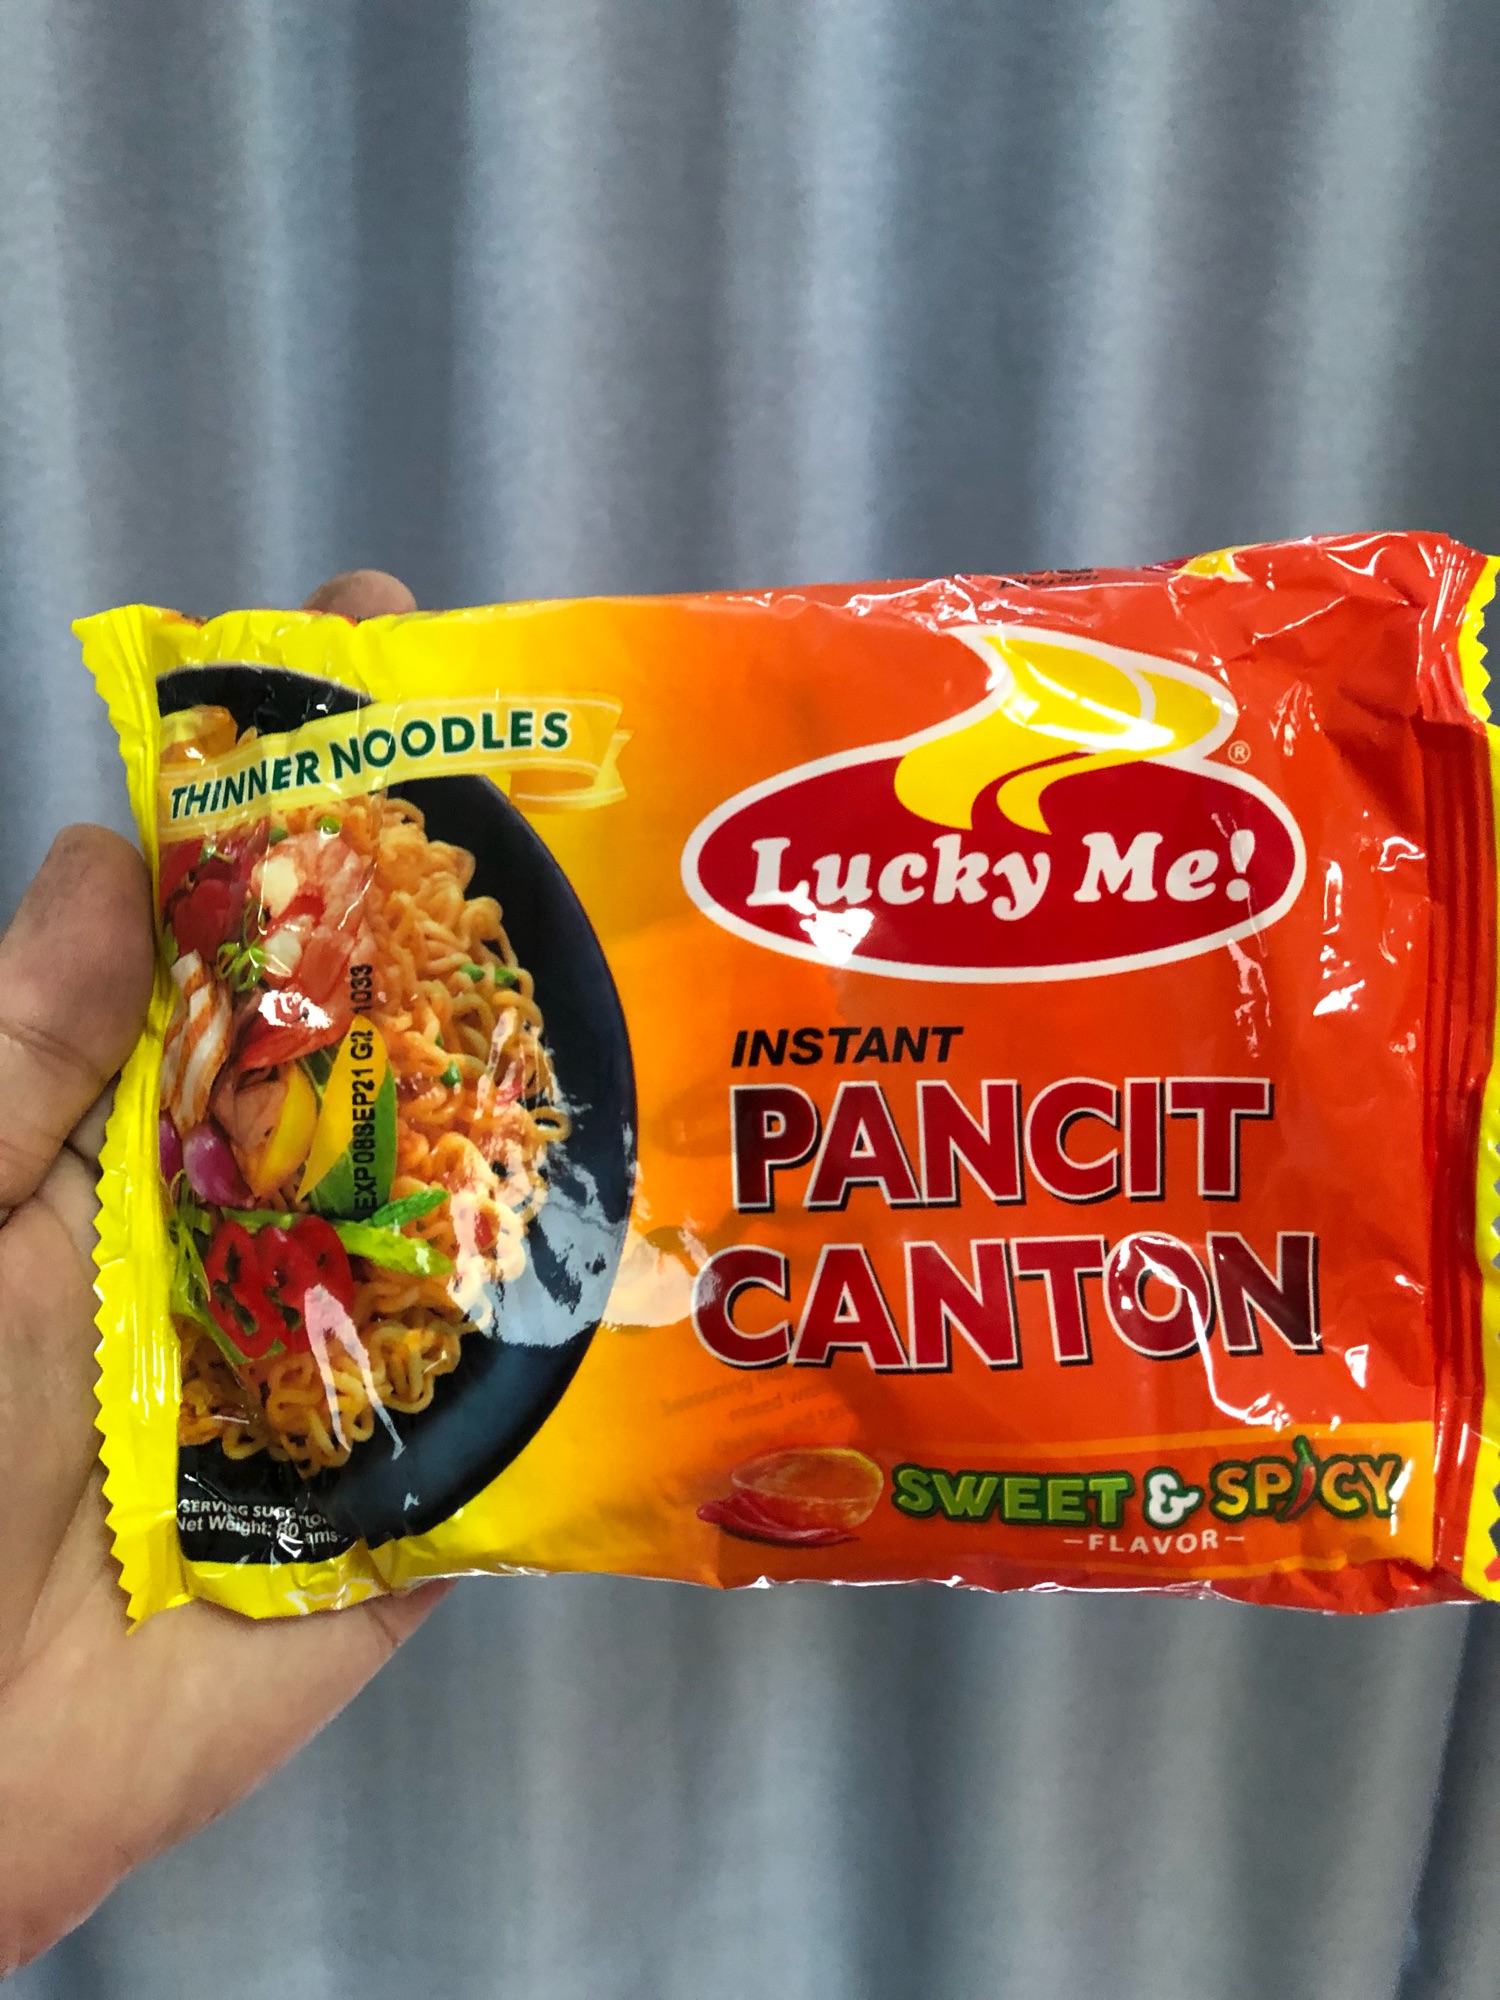 Lucky Me Pancit Canton Thinner noodles